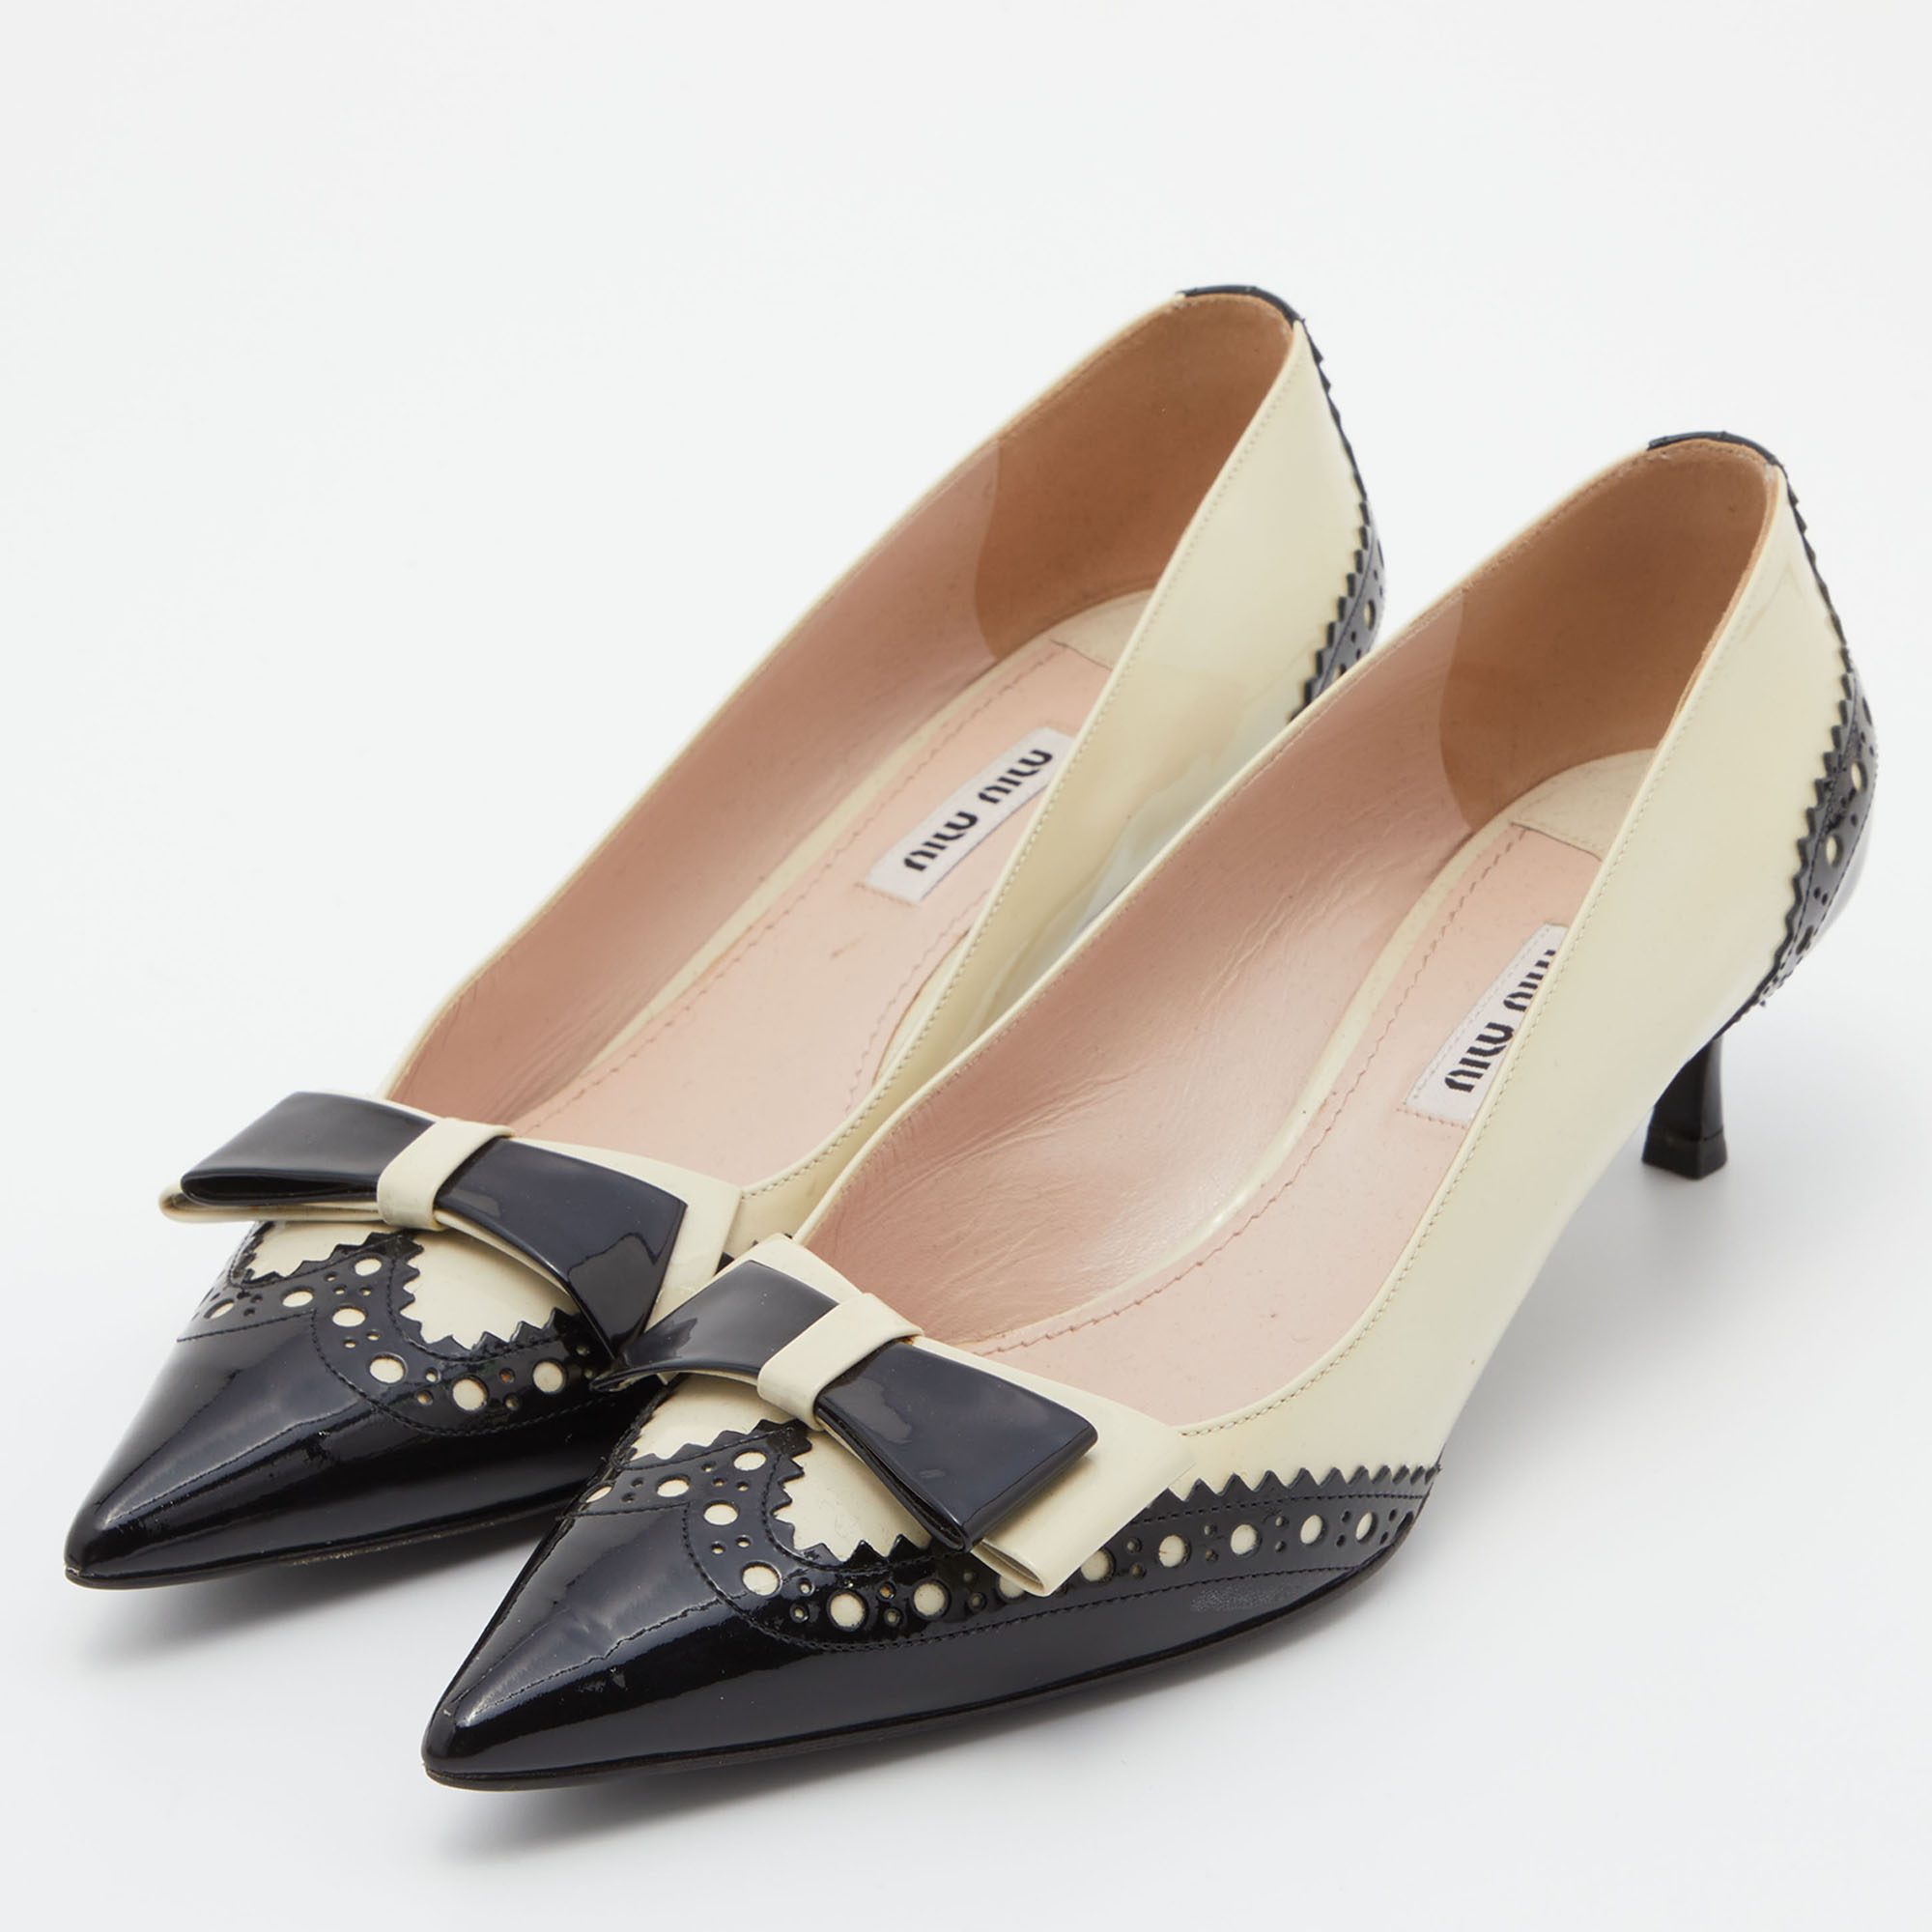 

Miu Miu Two Tone Patent Leather Double Bow Pointed Toe Pumps Size, Black